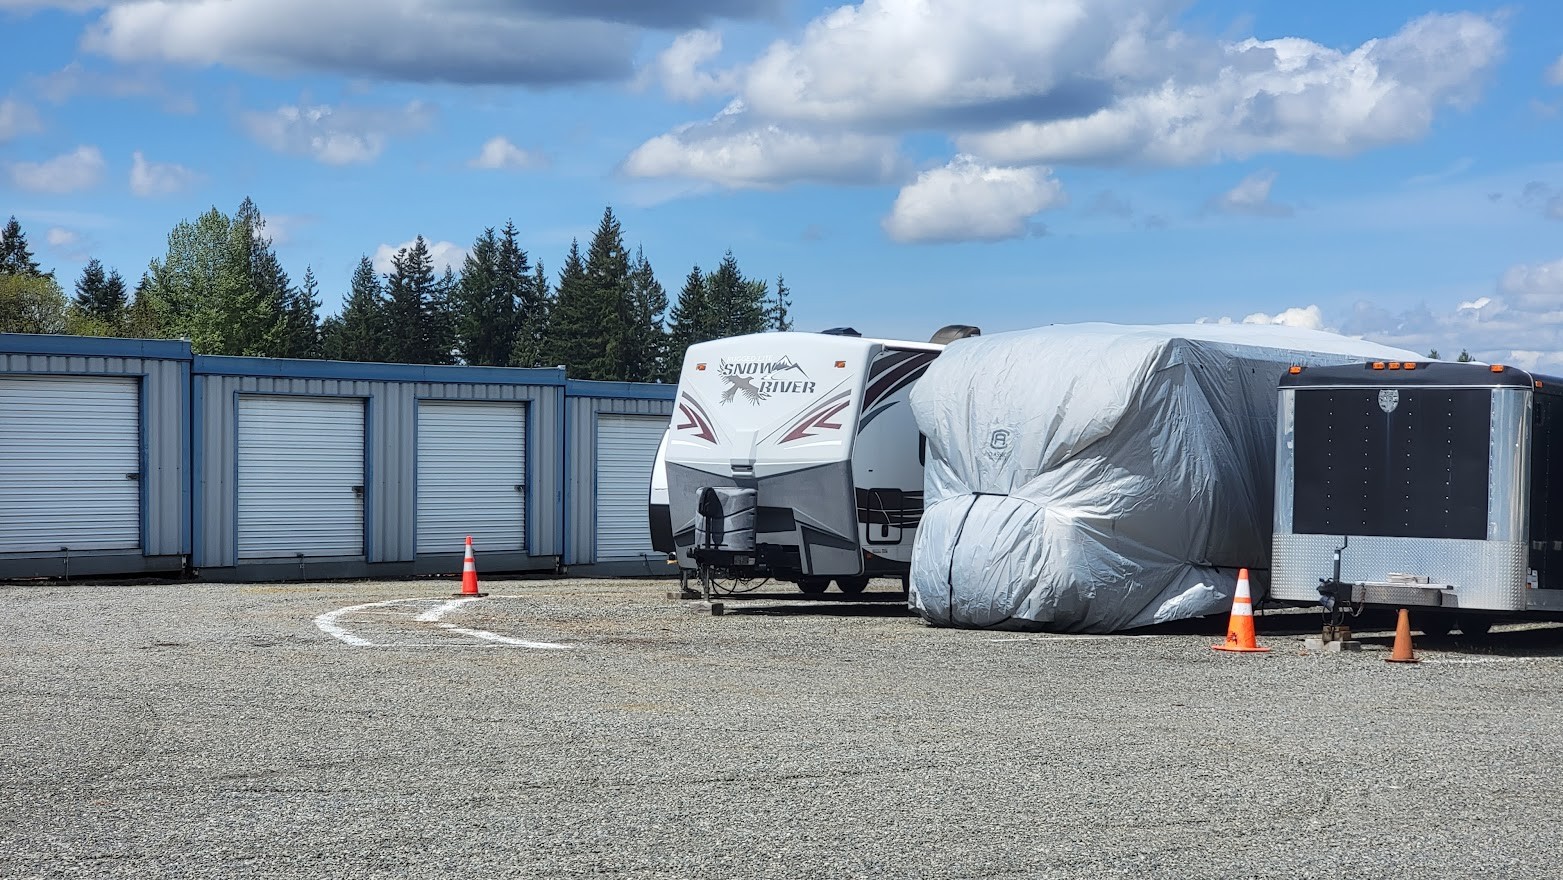 Storage Facility and RVs Covered